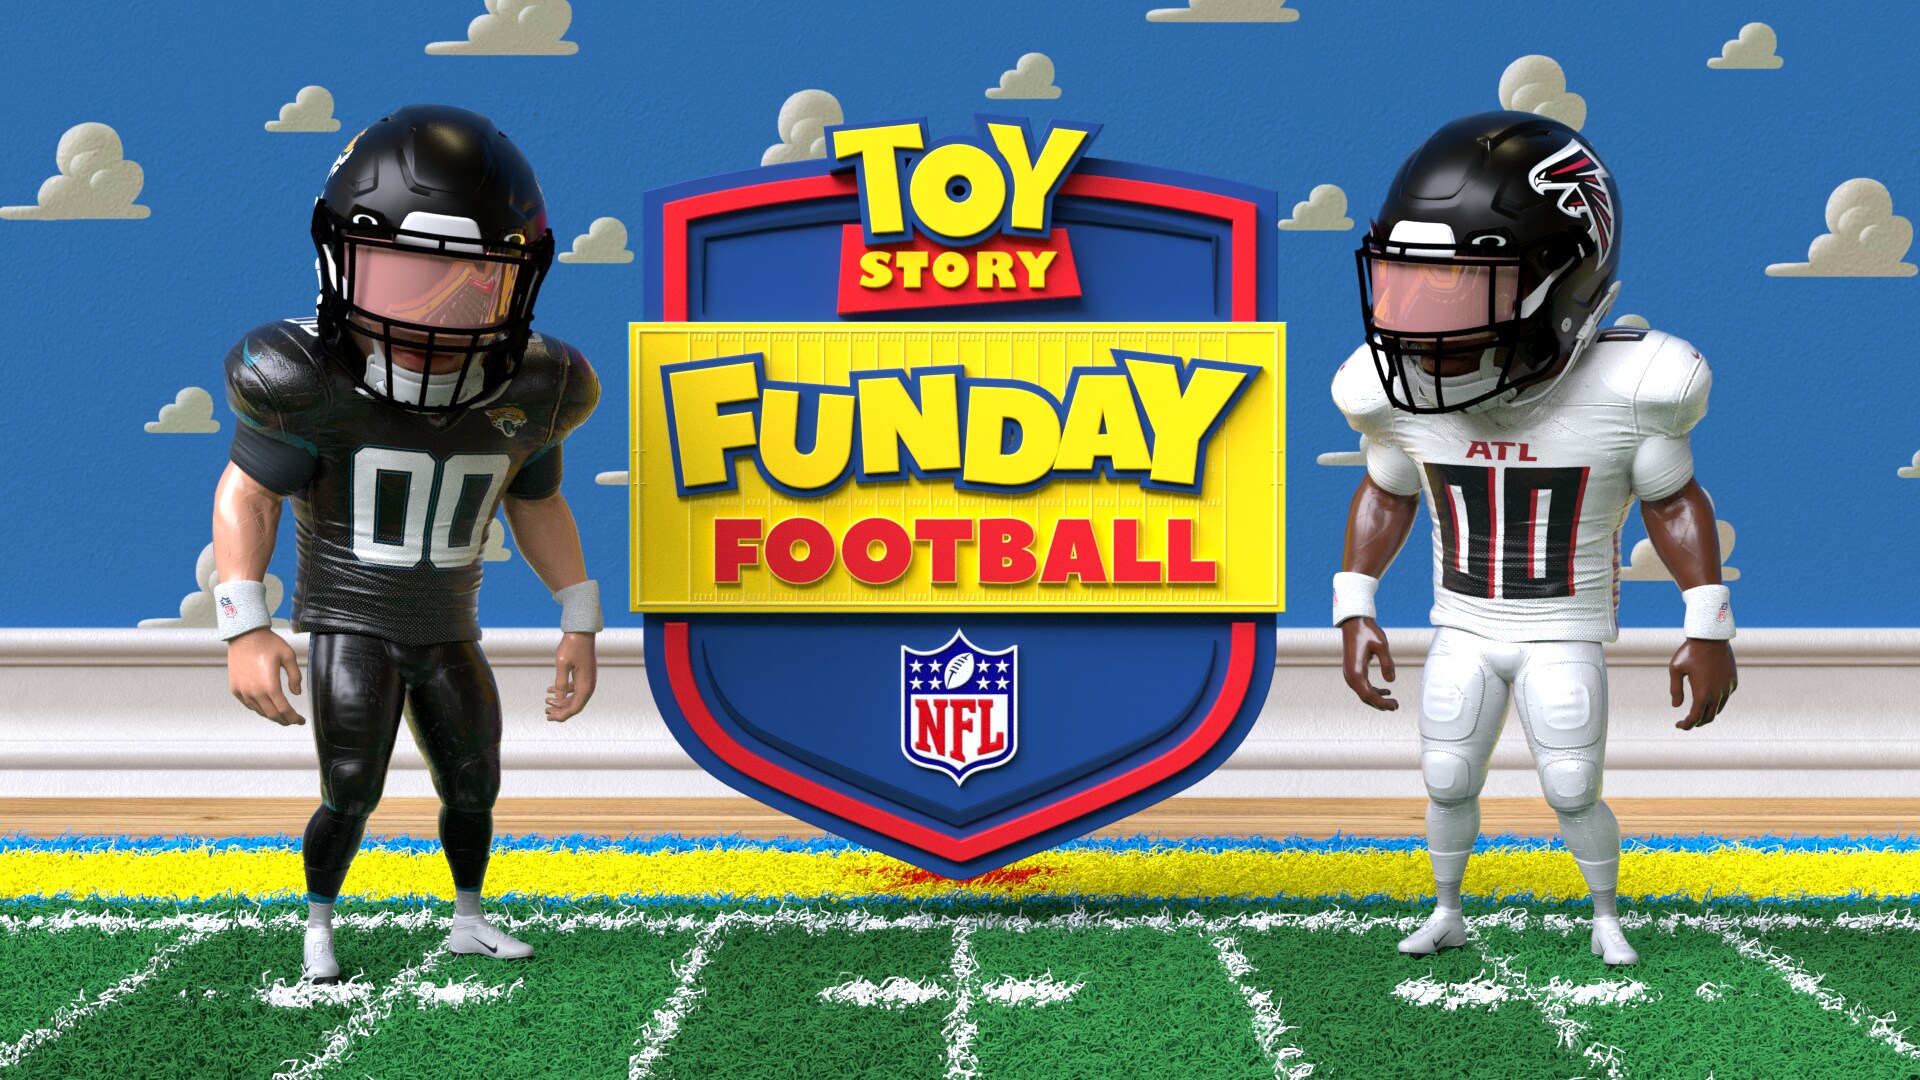 “To Infinity and Beyond!” ESPN, The Walt Disney Company, and the NFL are Bringing Fans a First-of-its-Kind, Fully-Animated Alternate NFL Game Presentation of the Falcons and Jaguars in Pixar’s Iconic “Toy Story” Universe